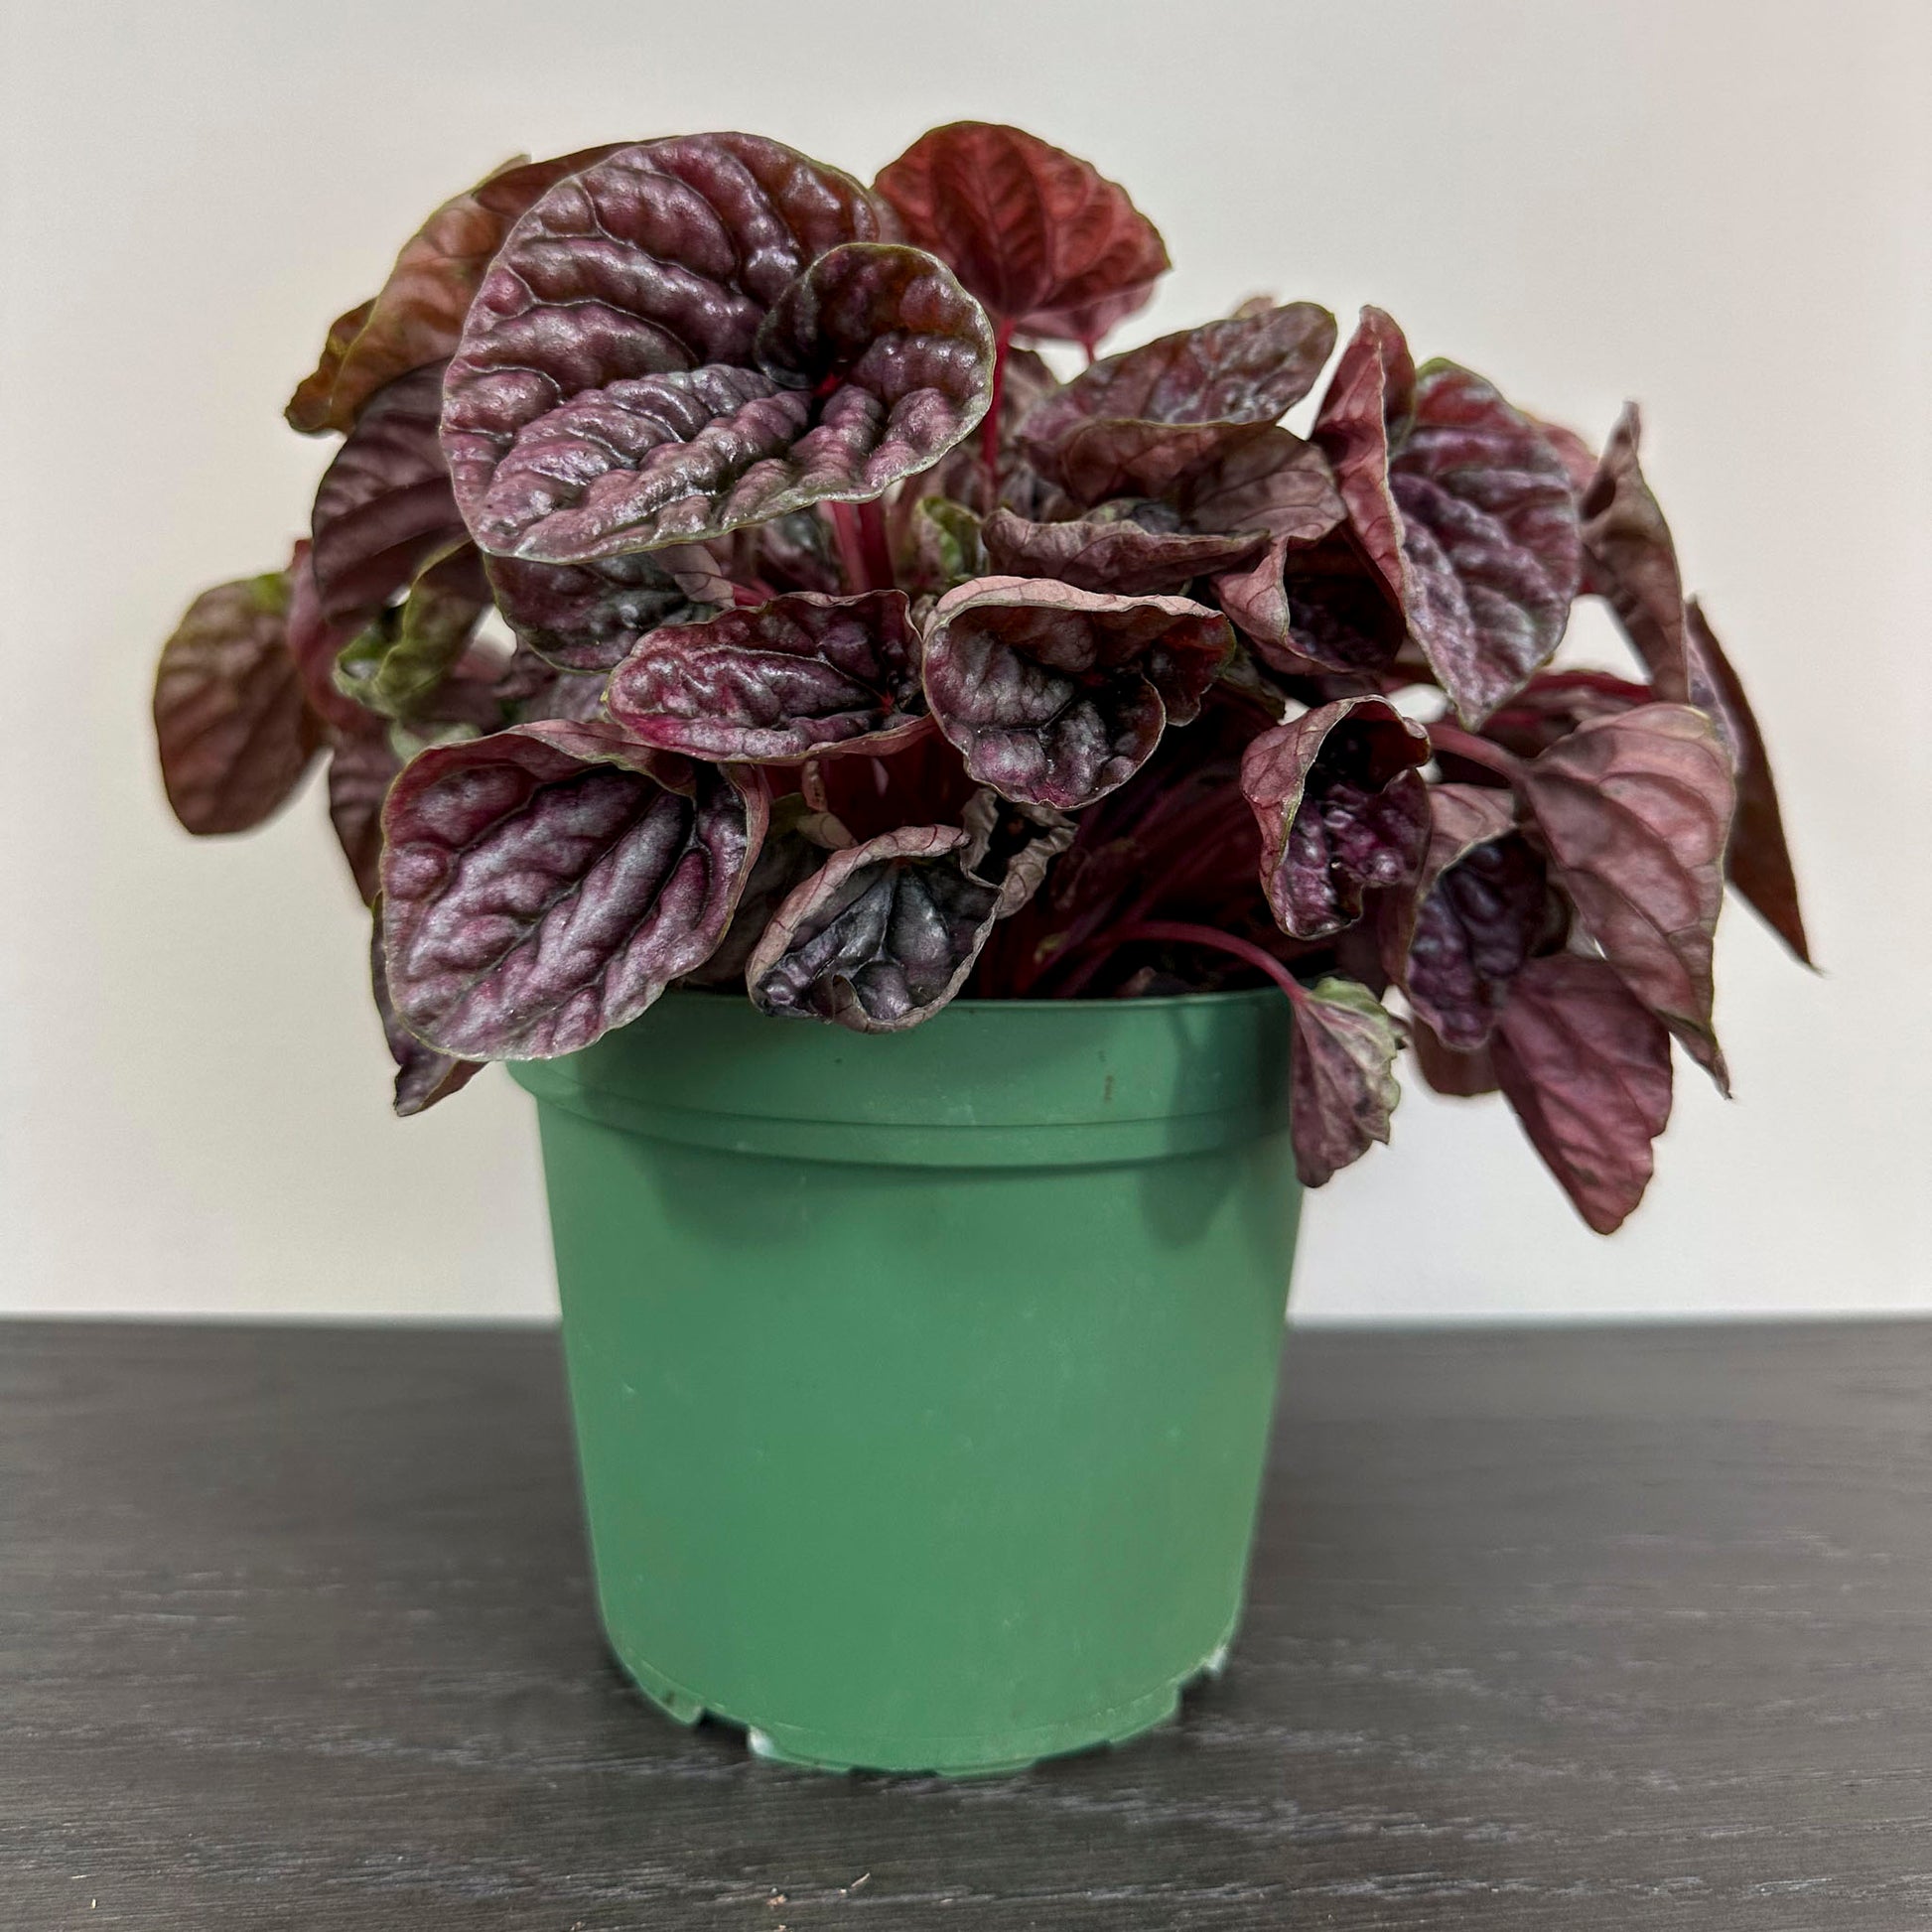 Peperomia 'Red Ripple' - A striking indoor plant with vibrant red-veined leaves.